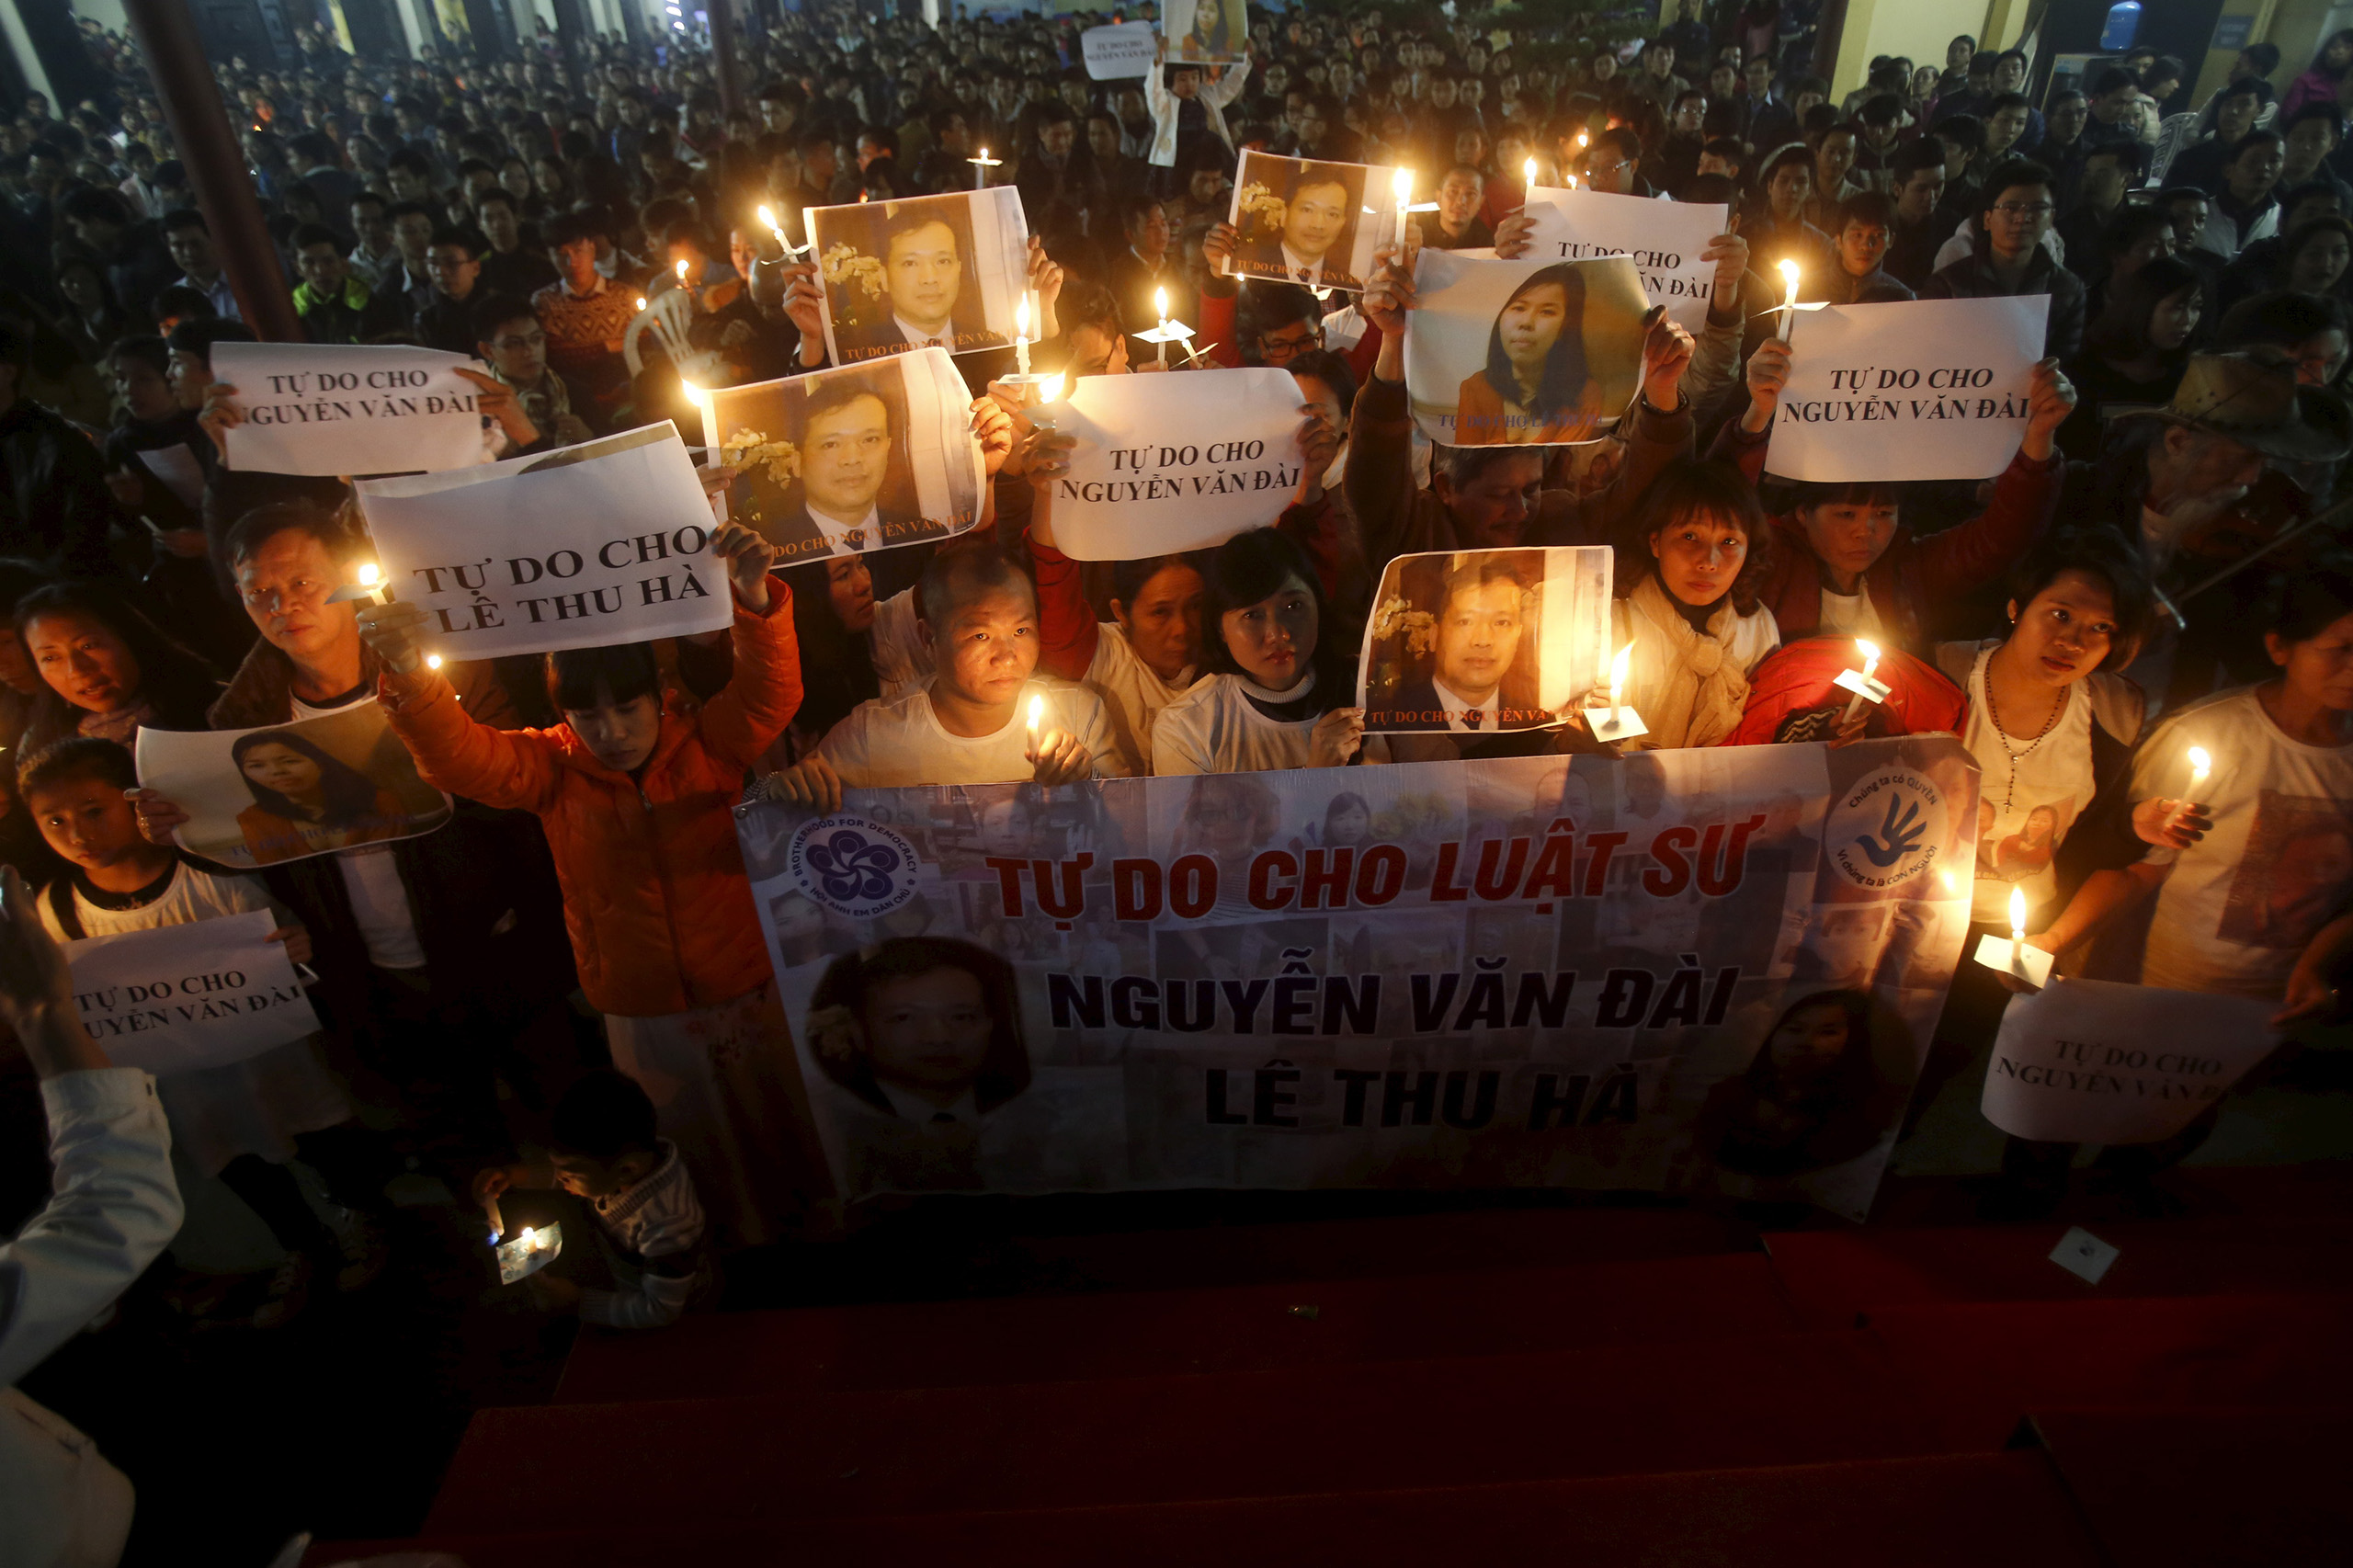 Khanh holds an image of her husband Dai as Catholics hold candles and image of Dai's assistant Ha during a mass prayer for Dai and Ha at Thai Ha church in Hanoi